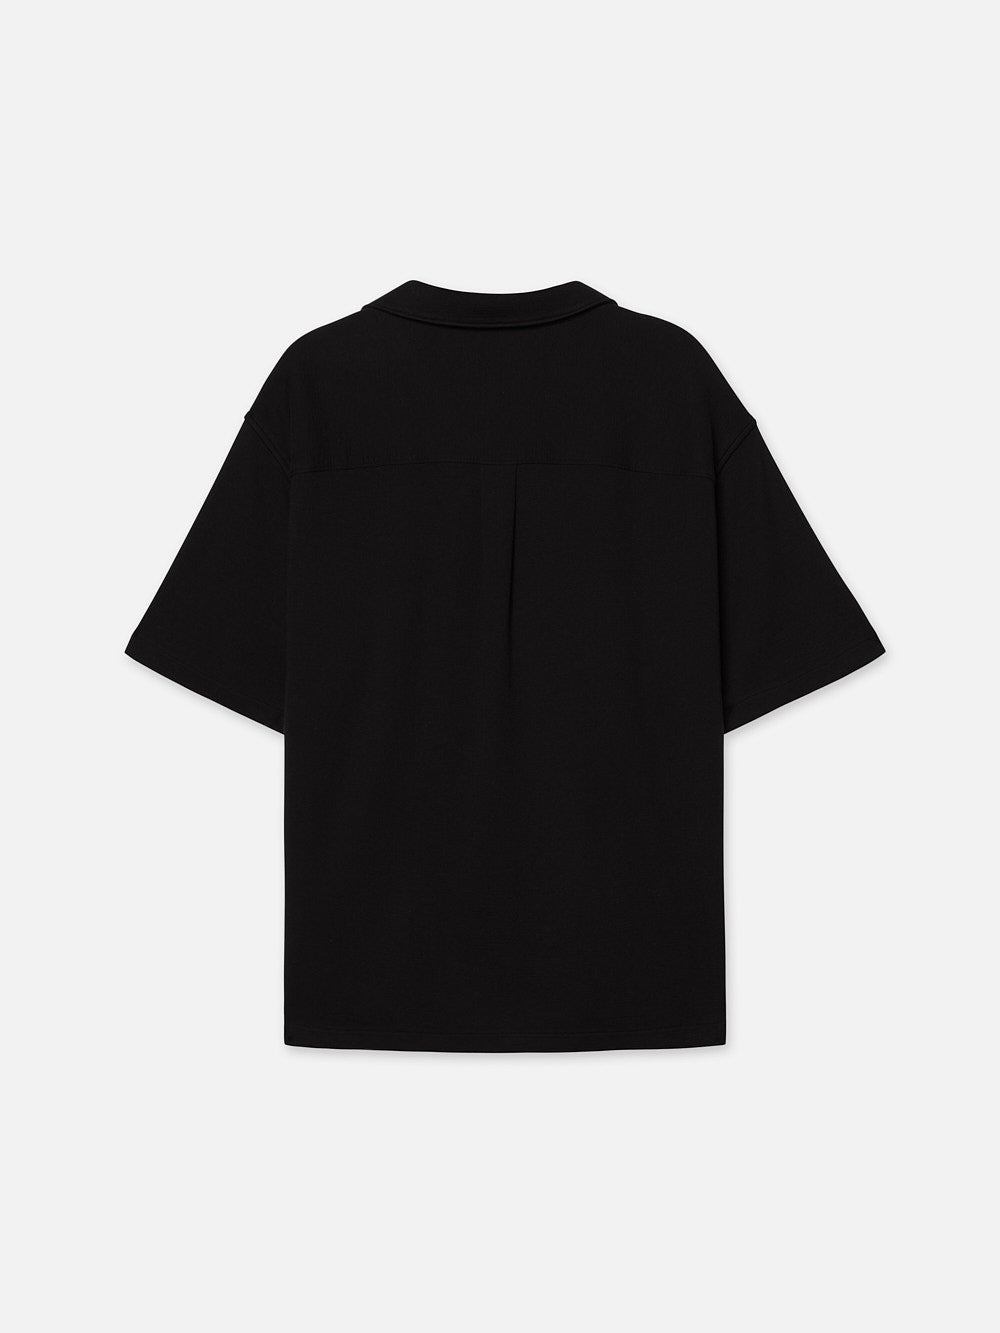 Duo Fold Relaxed Shirt in Black - 3